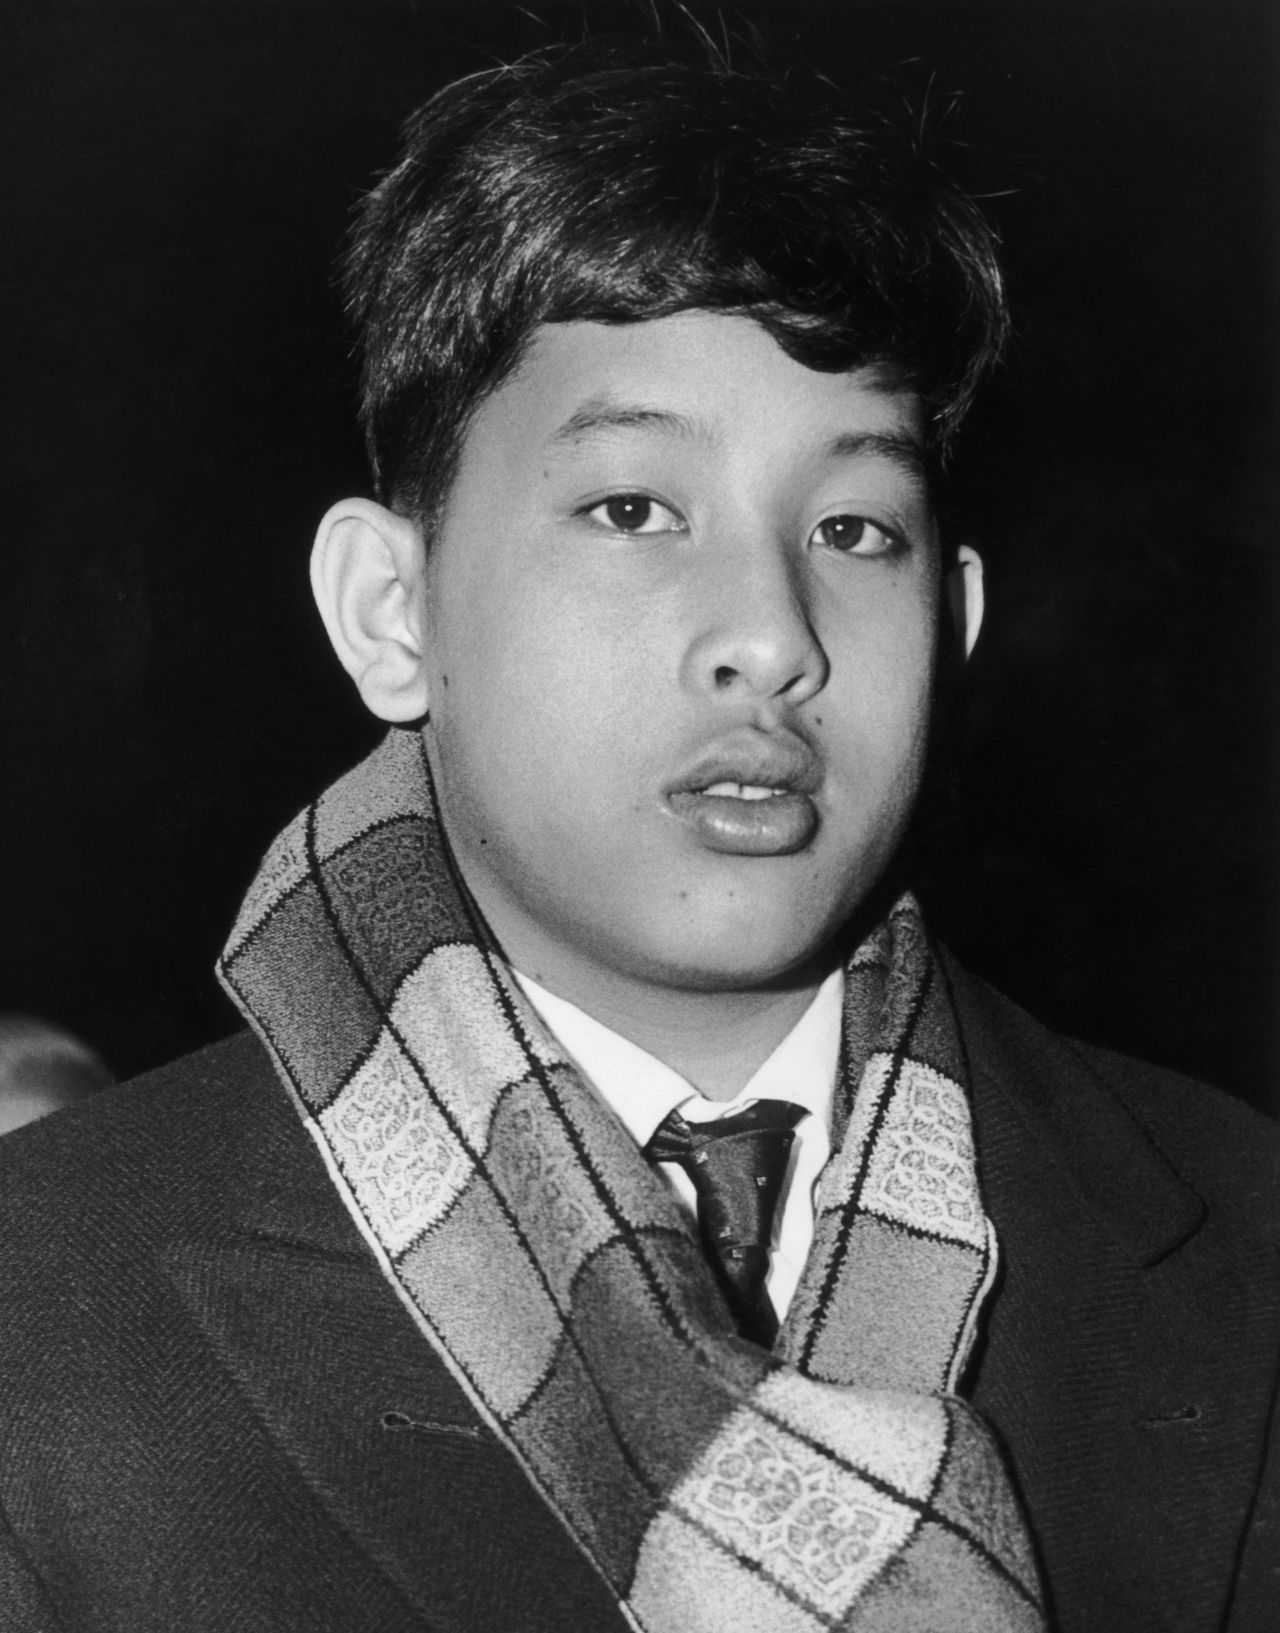 Vajiralongkorn arrives in London in 1966. He was educated in the United Kingdom and Australia before officially being declared crown prince and heir apparent in 1972.